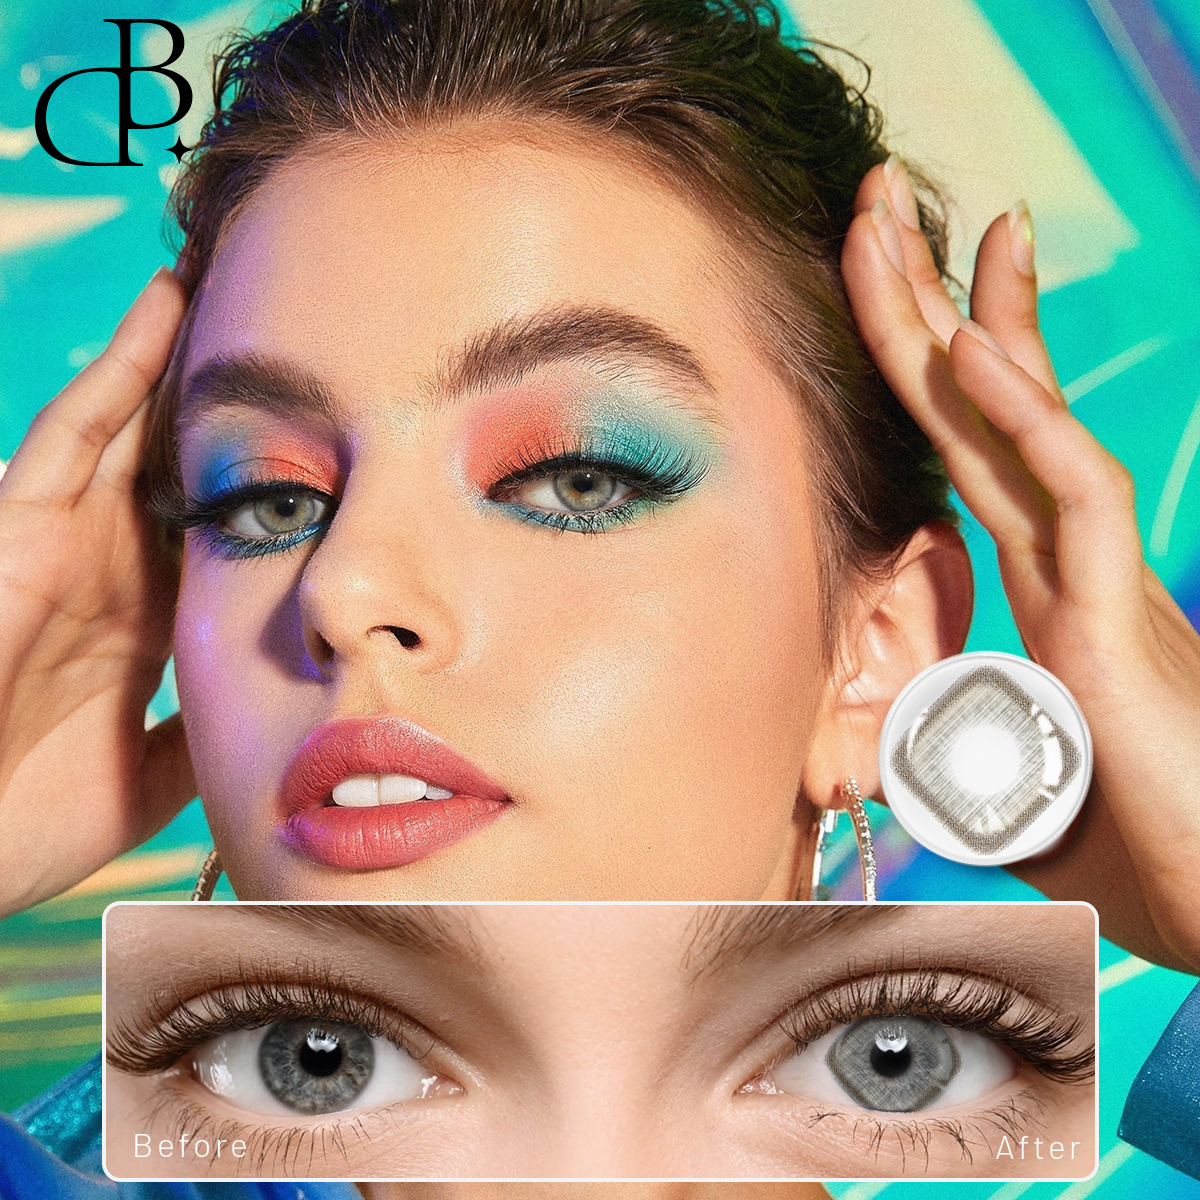 DBeyes Square Shaped brownColored Contact Lenses ขายส่งคอนแทคเลนส์ oem คอนแทคเลนส์สีคอสเพลย์